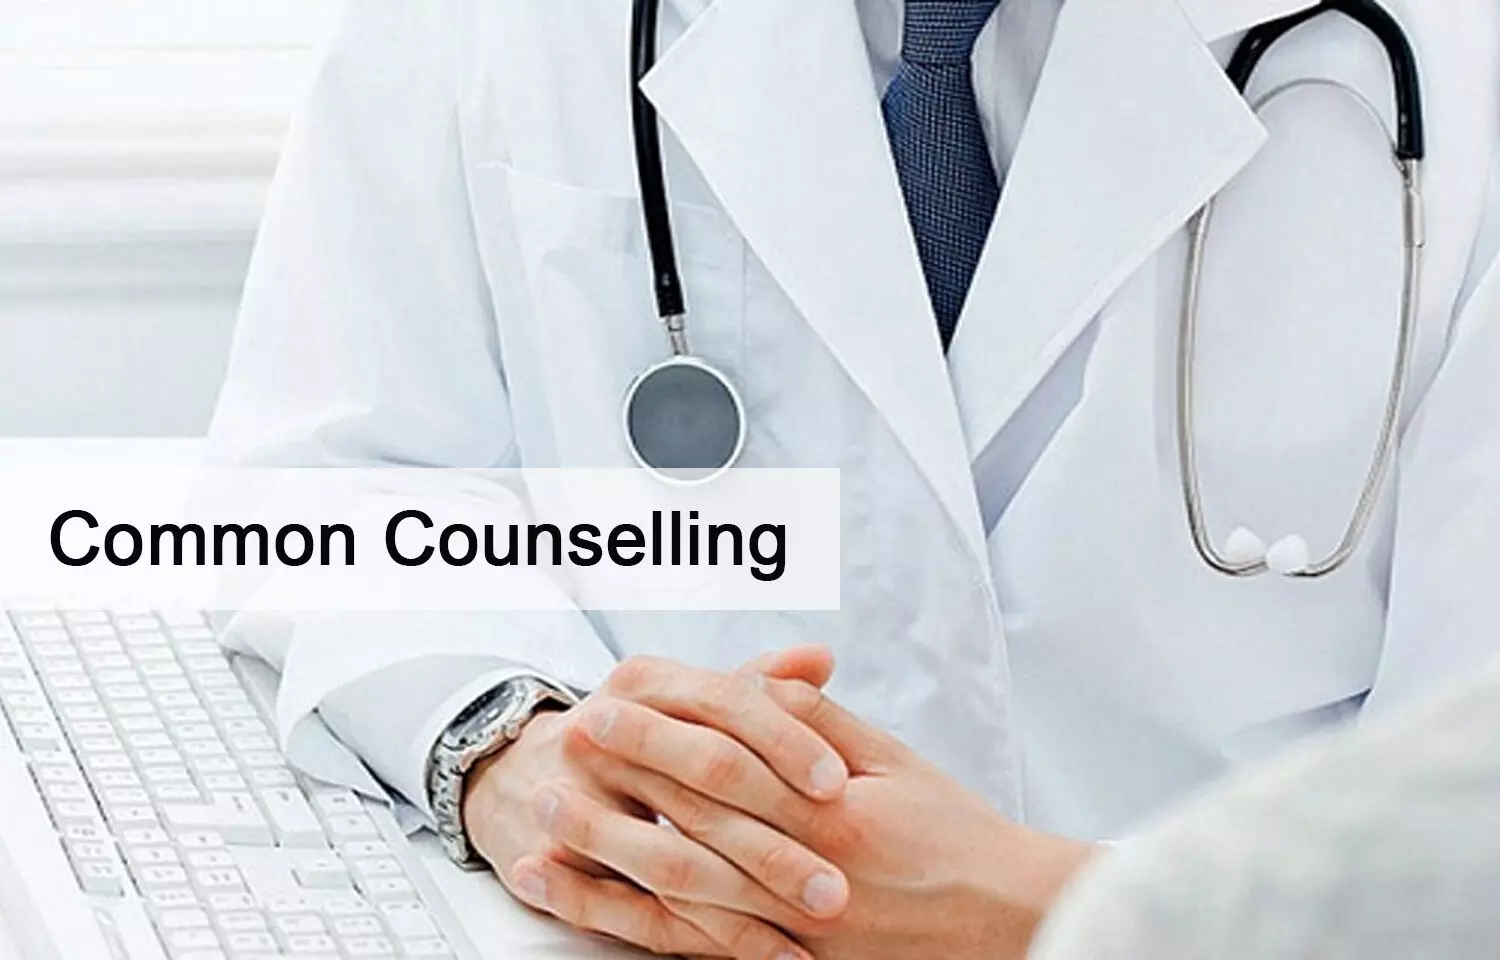 Common Counselling for PG Medical Admissions 2021: MCC notifies DNB institutes on allotment process